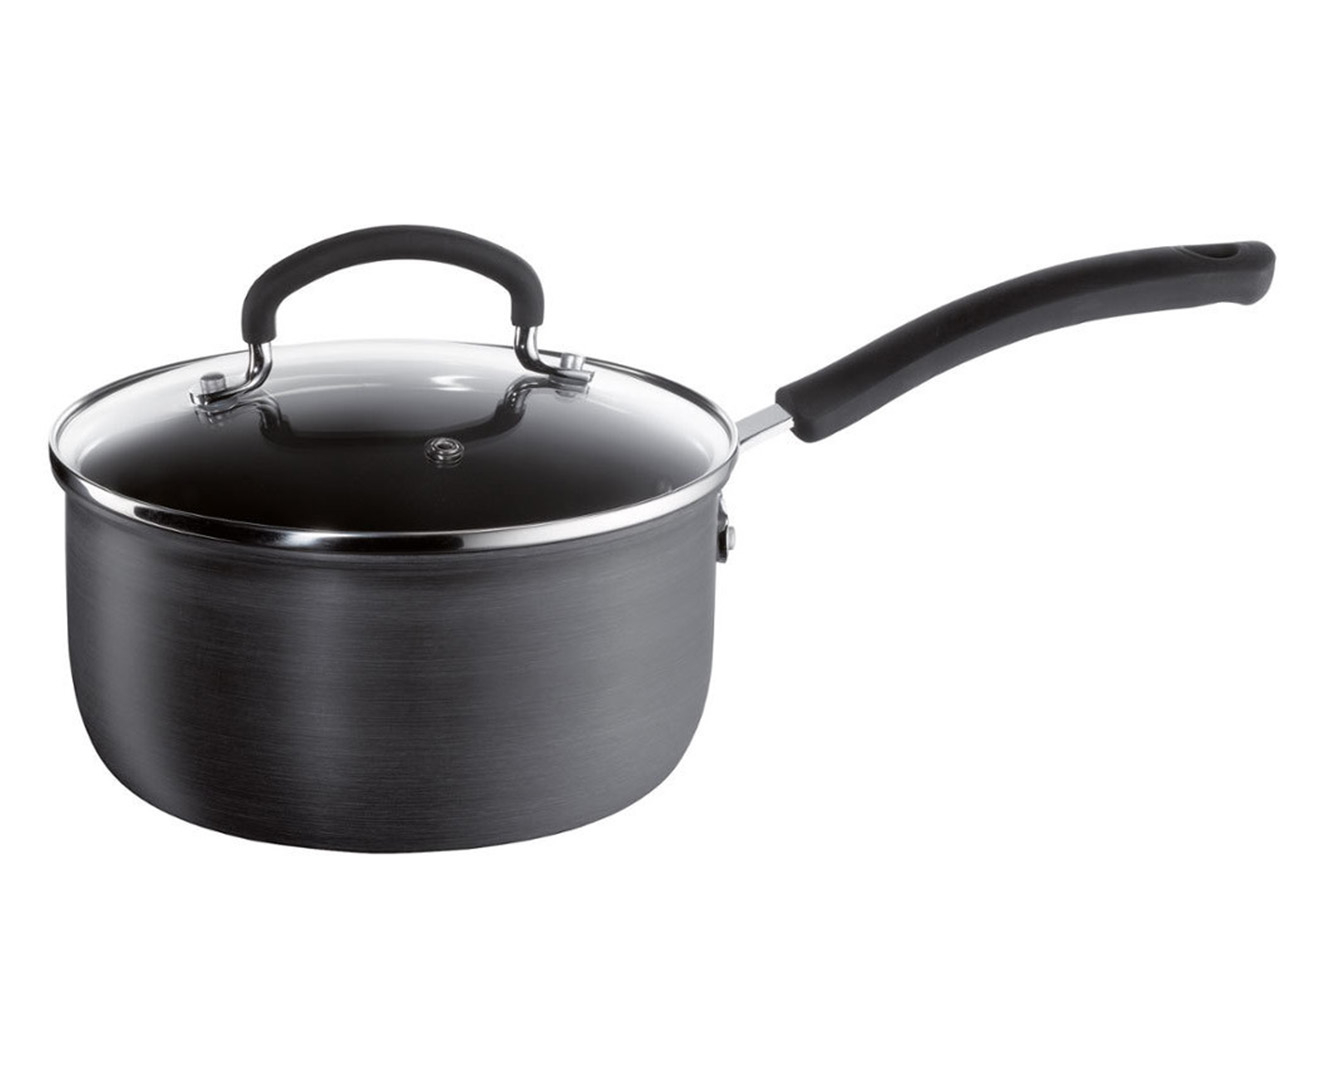 Tefal Premium Specialty Hard Anodised Induction Non-Stick 5pc Set